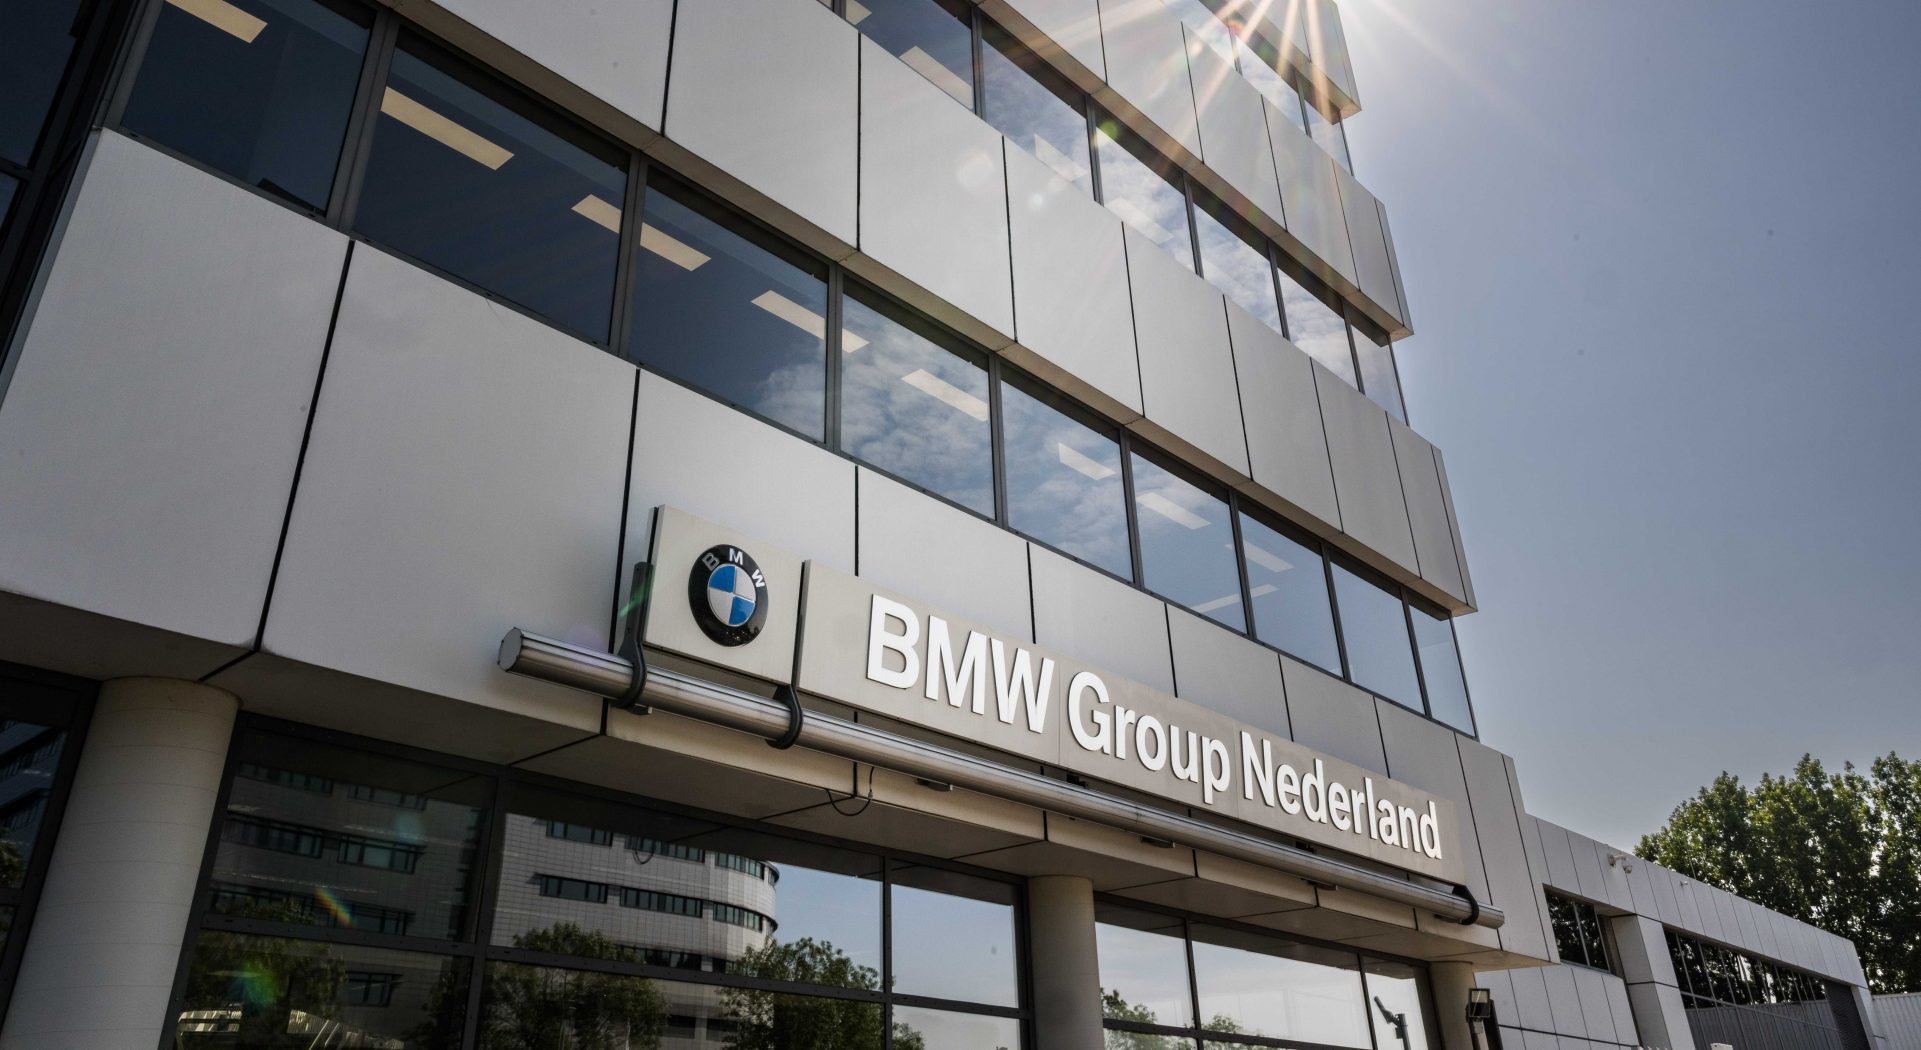 Our entities in the BMW Group Netherlands.